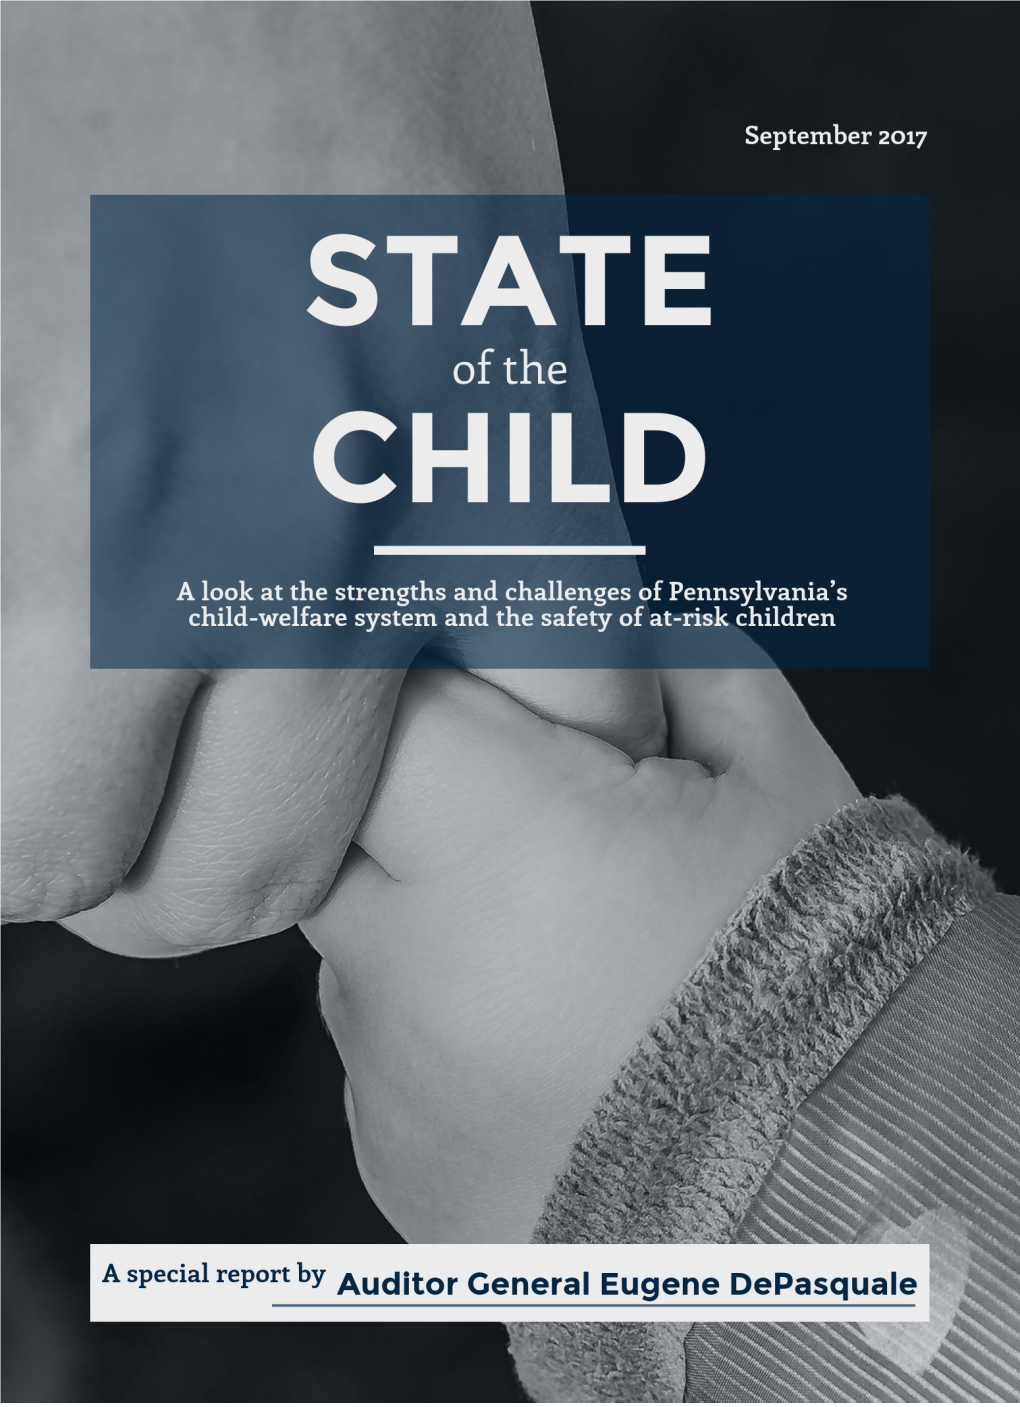 State Child-Welfare Agencies, Such As Pennsylvania’S Department of Human Services (DHS), Which Oversees the Office of Children, Youth and Families